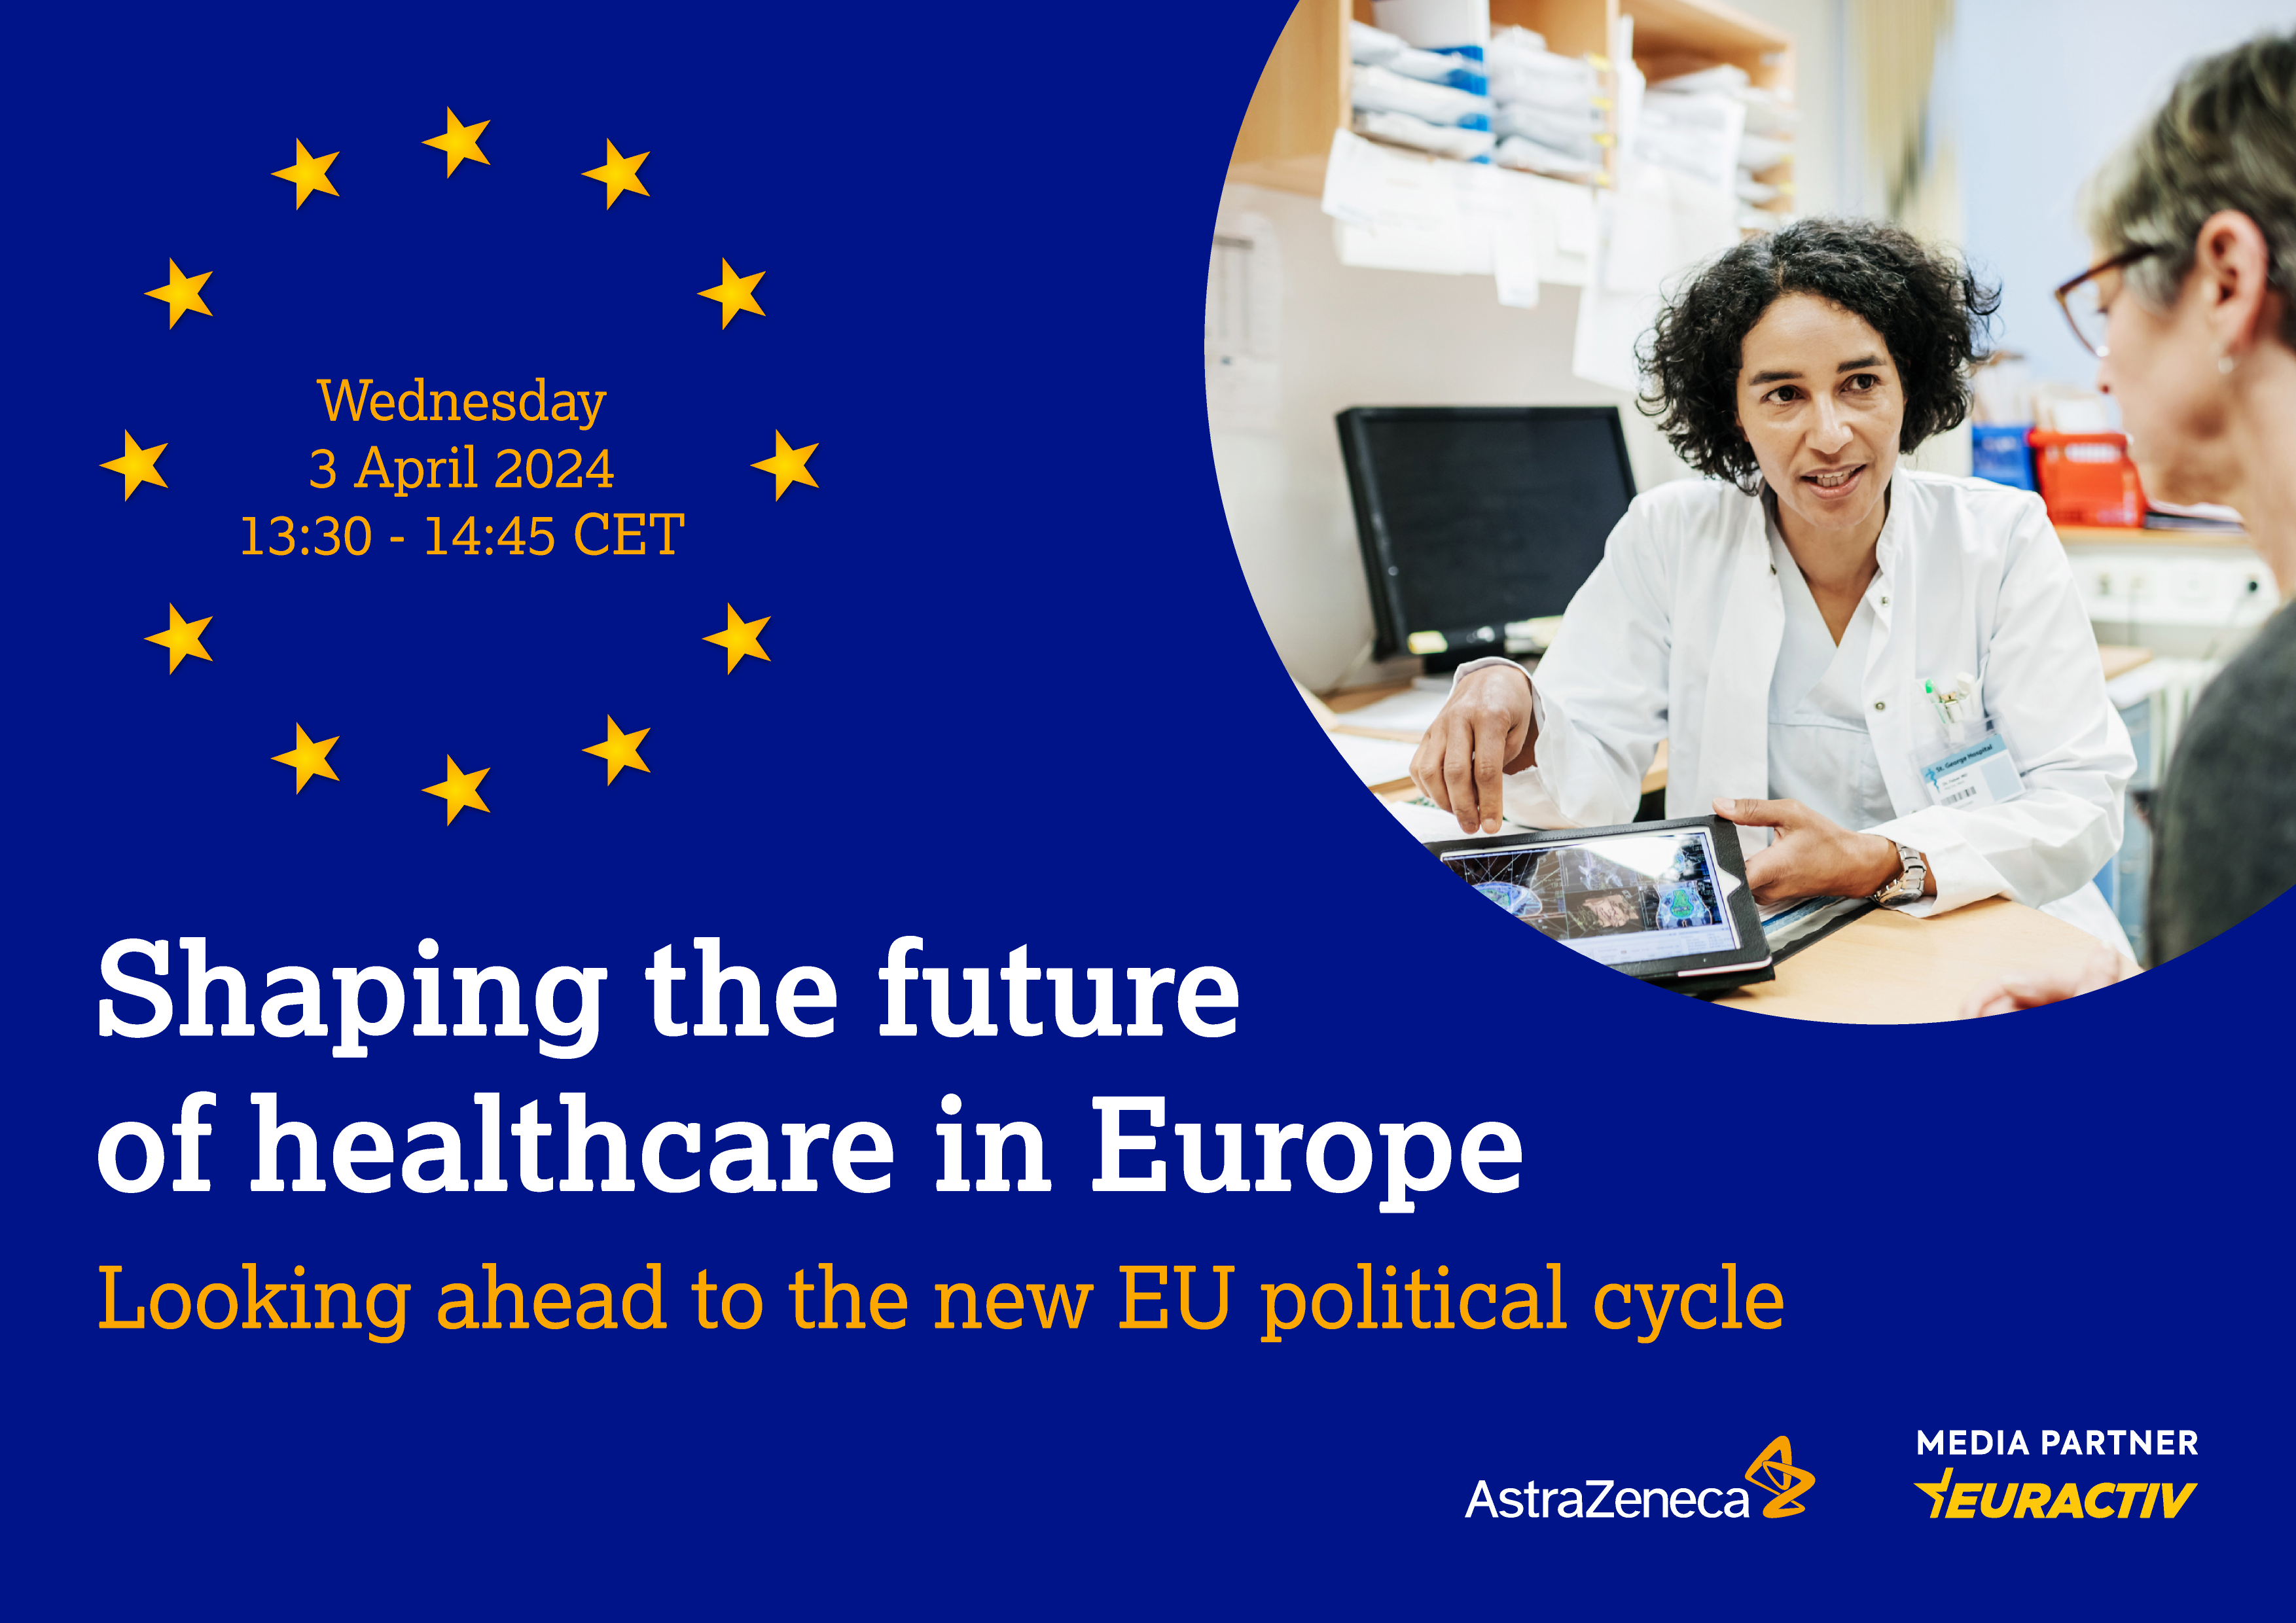 Media Partnership - Shaping the future of healthcare in Europe: looking ahead to the new EU political cycle